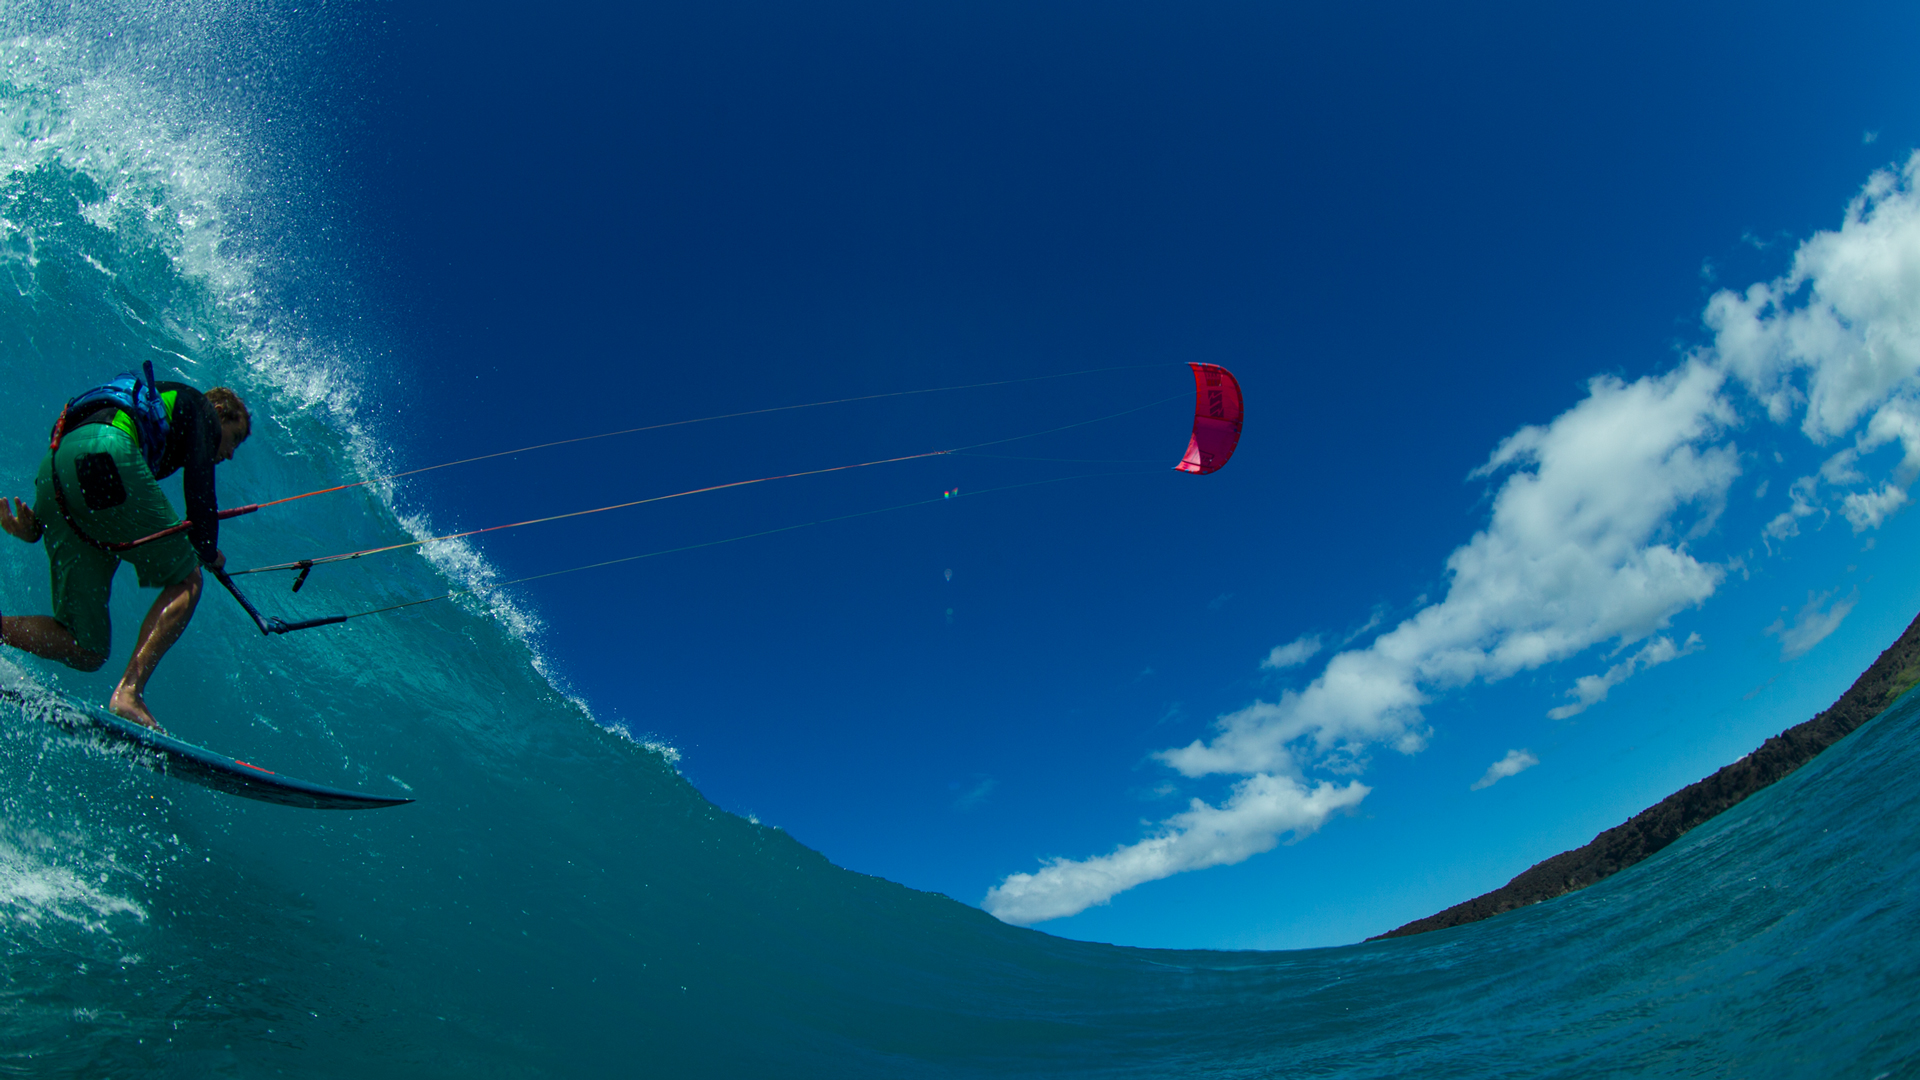 kitesurf wallpaper image - A kiteboarder - Patri Mclaughlin - with the North Kiteboarding 2016 Neo kite riding a wave. - in resolution: High Definition - HD 16:9 1920 X 1080